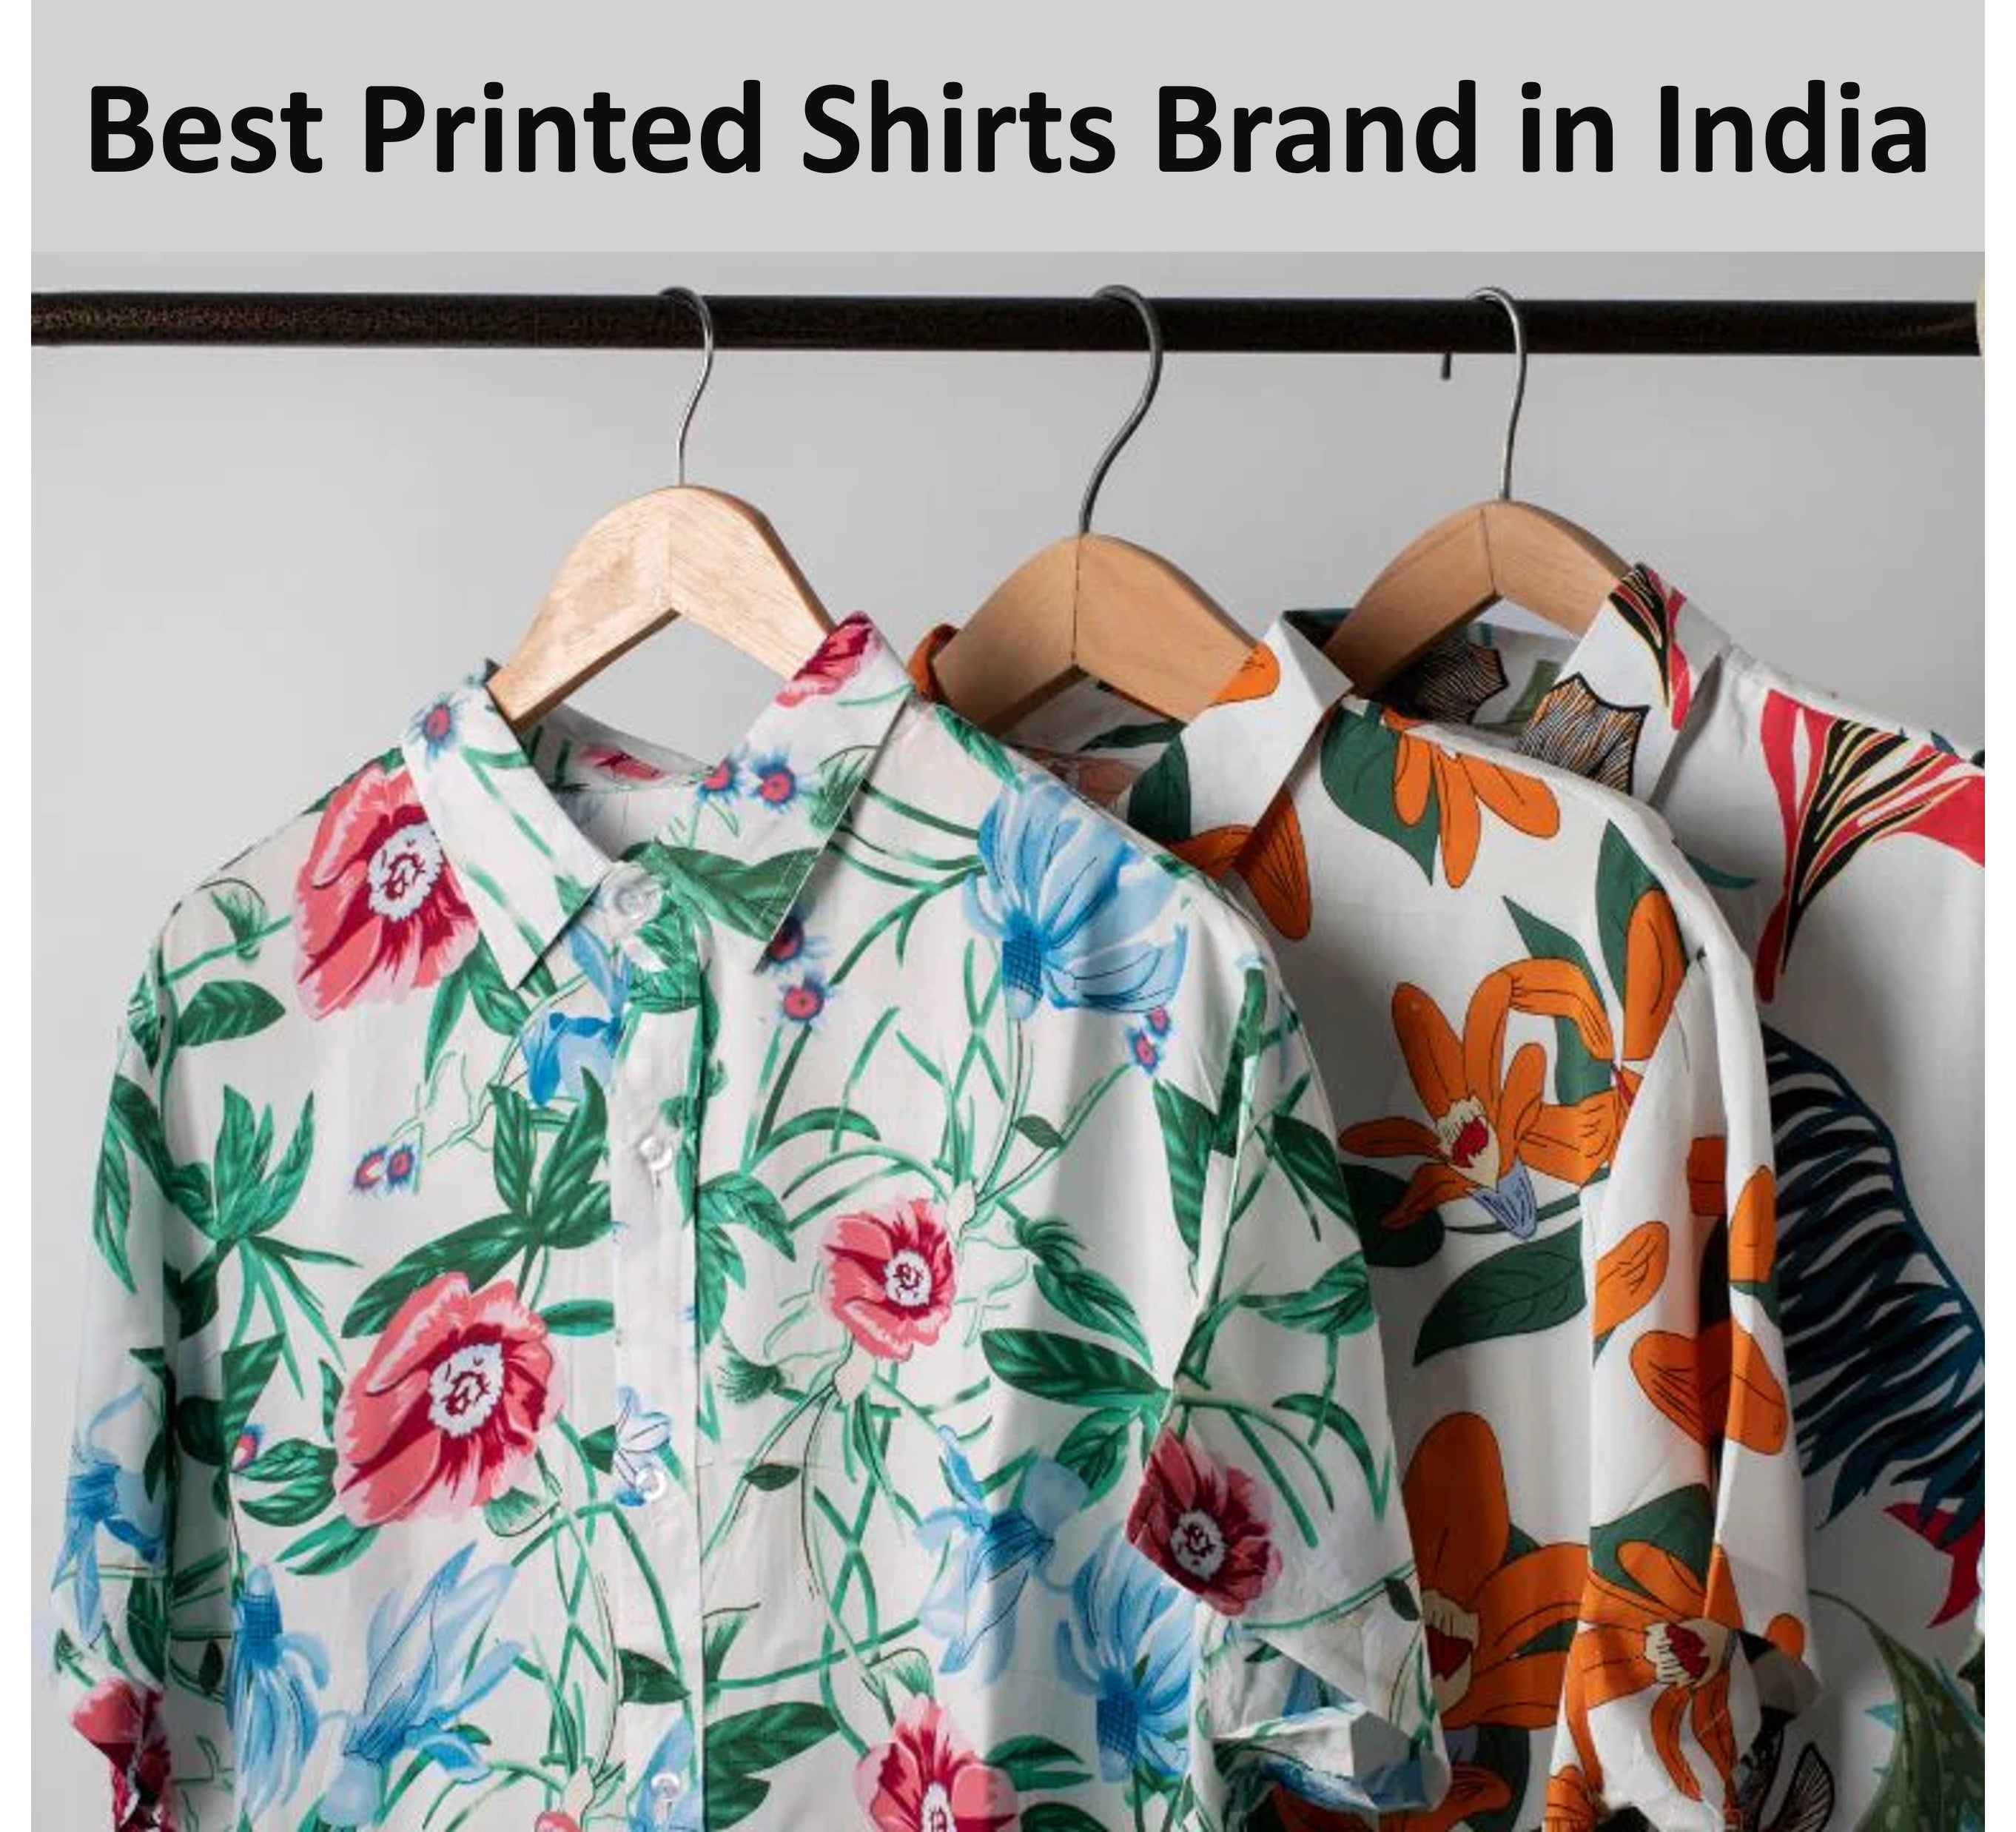 Top 10 Best Printed Shirts Brands in India